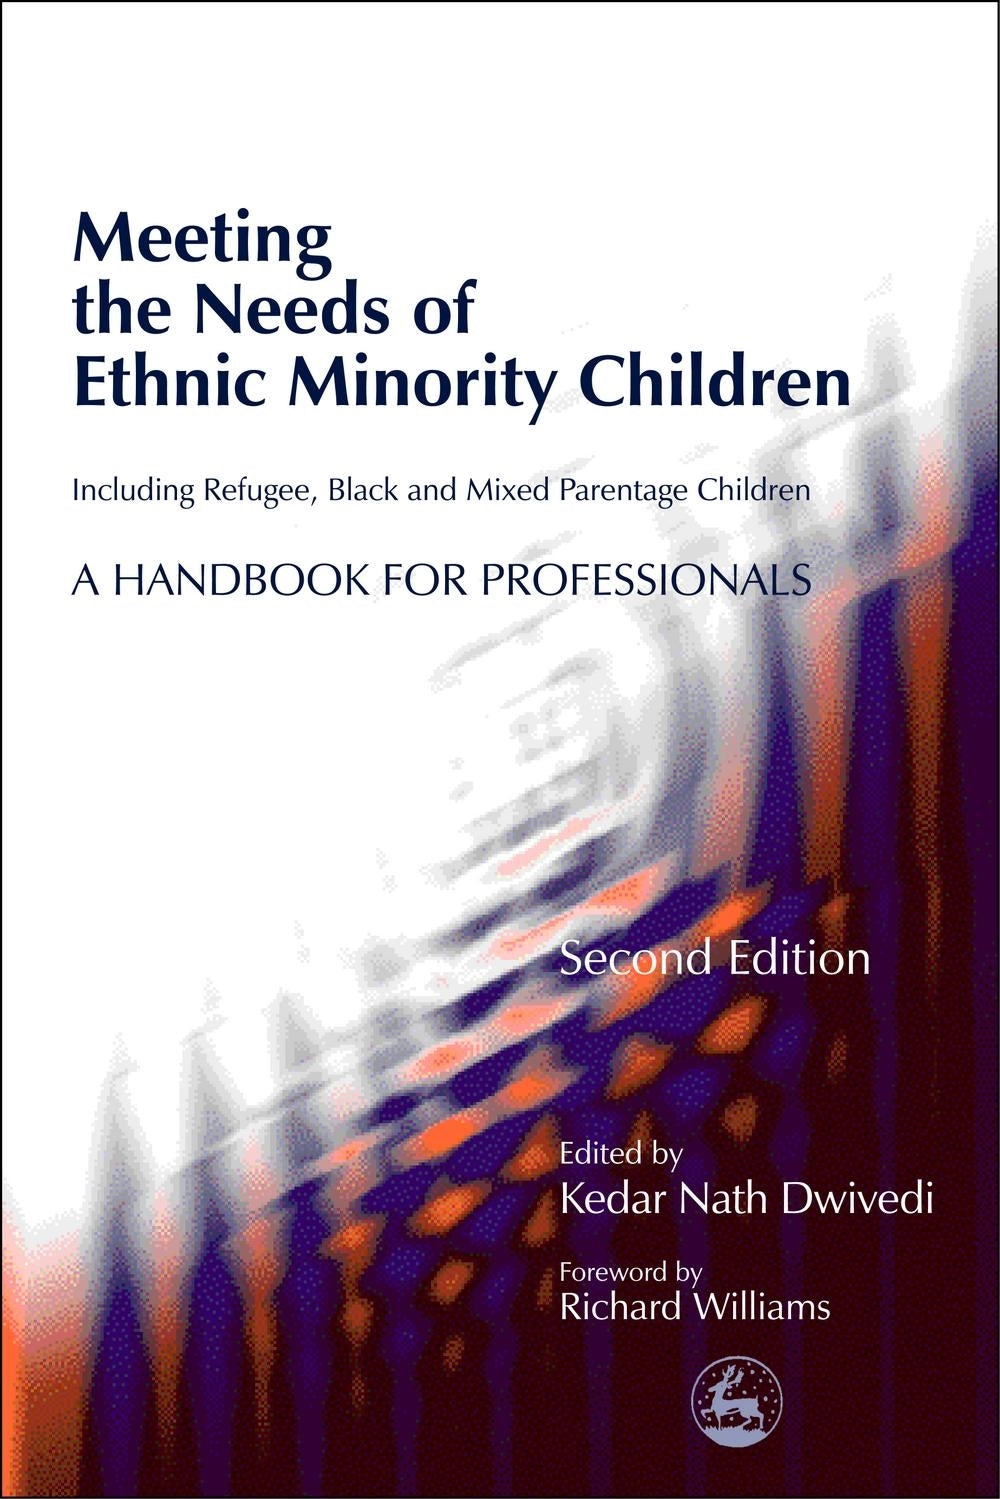 Meeting the Needs of Ethnic Minority Children - Including Refugee, Black and Mixed Parentage Children by Kedar Nath Dwivedi